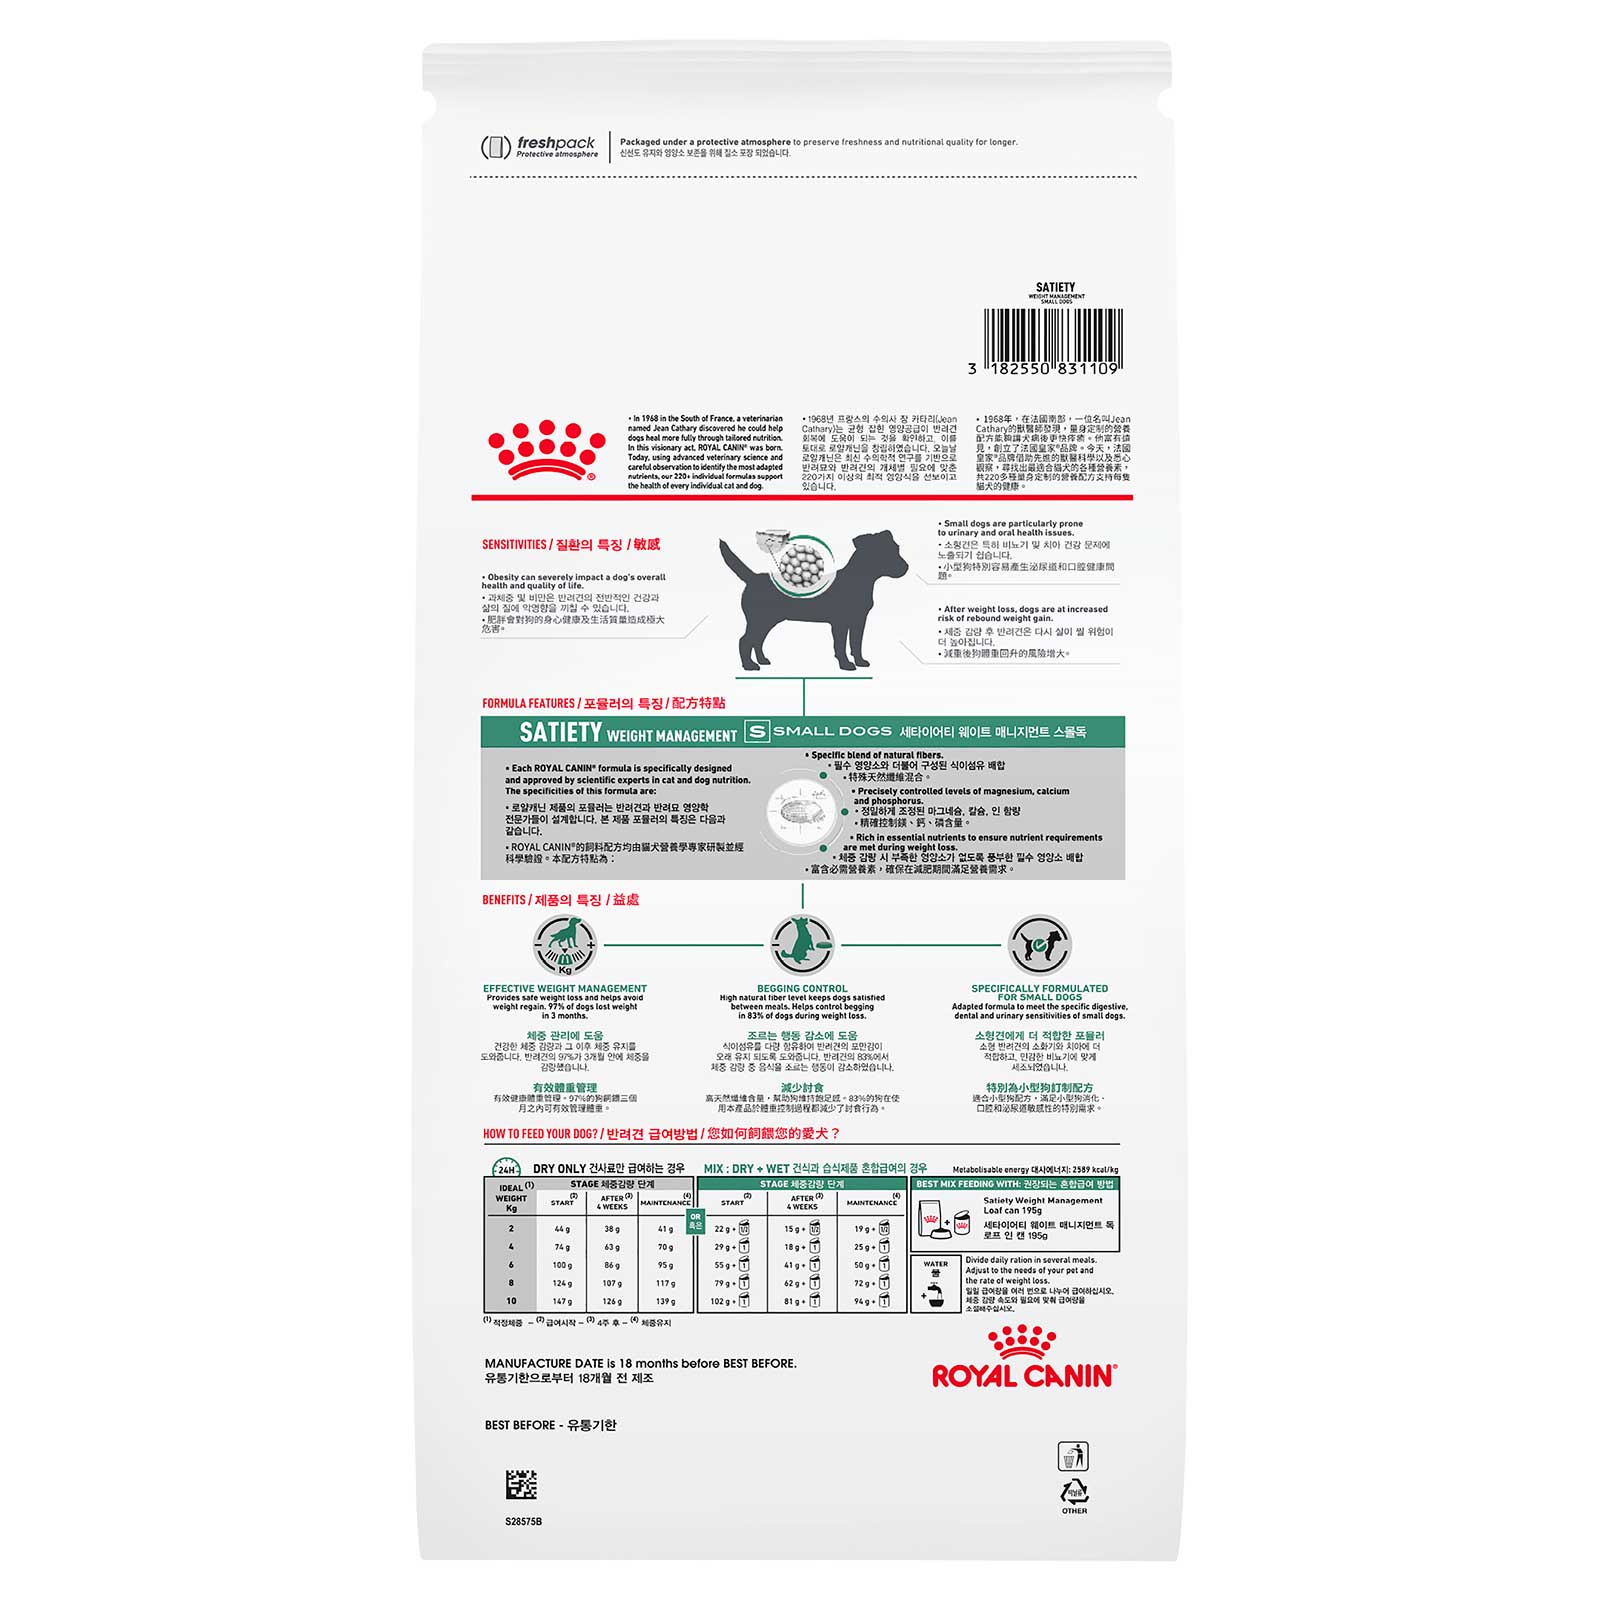 Royal Canin Veterinary Dog Food Satiety Weight Management Small Dog